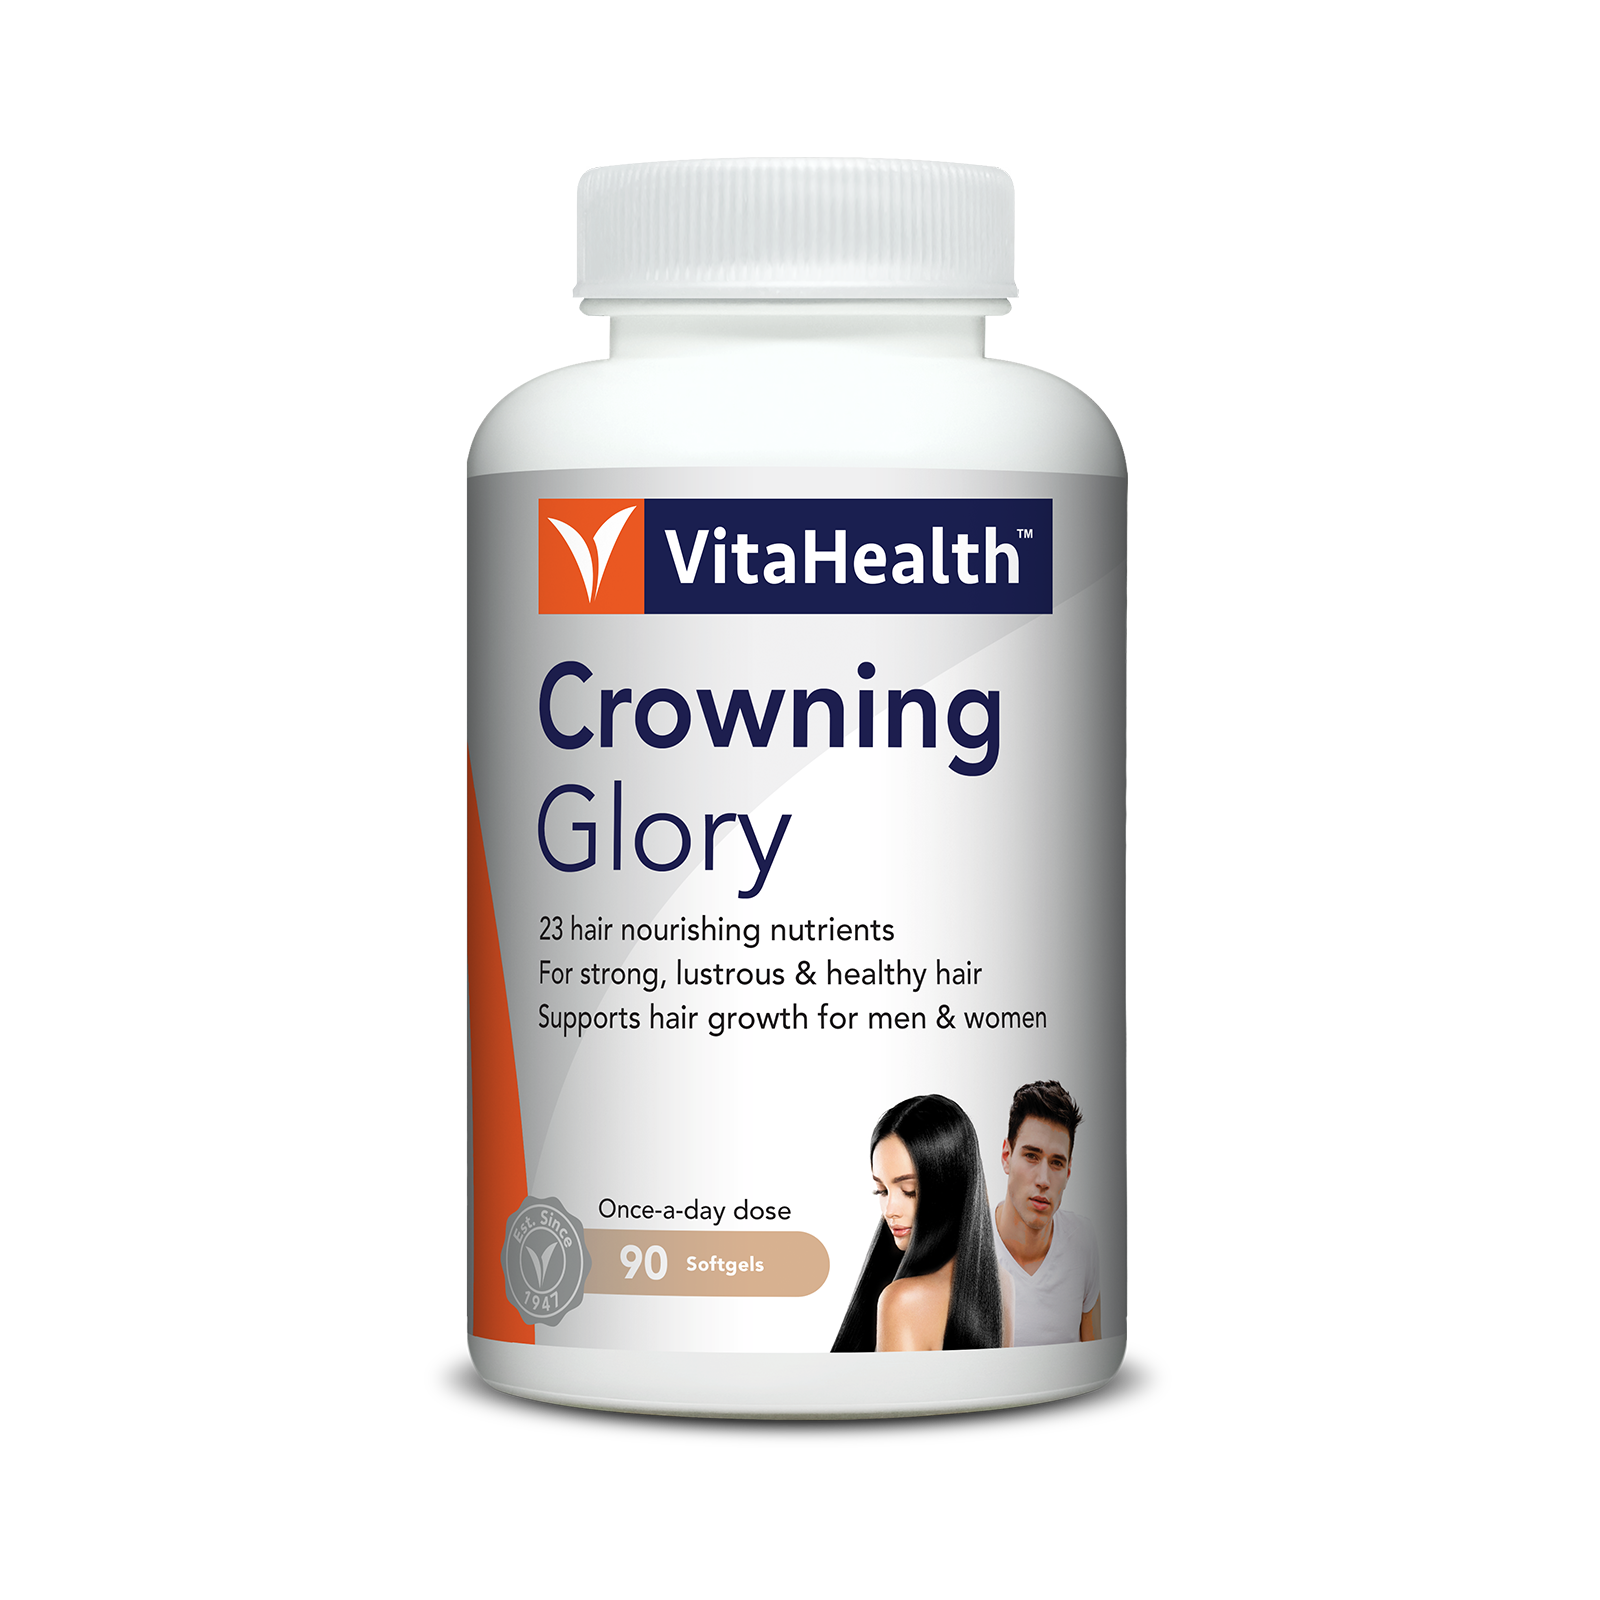 Crowning Glory - VitaHealth. Enriching Lives. Since 1947